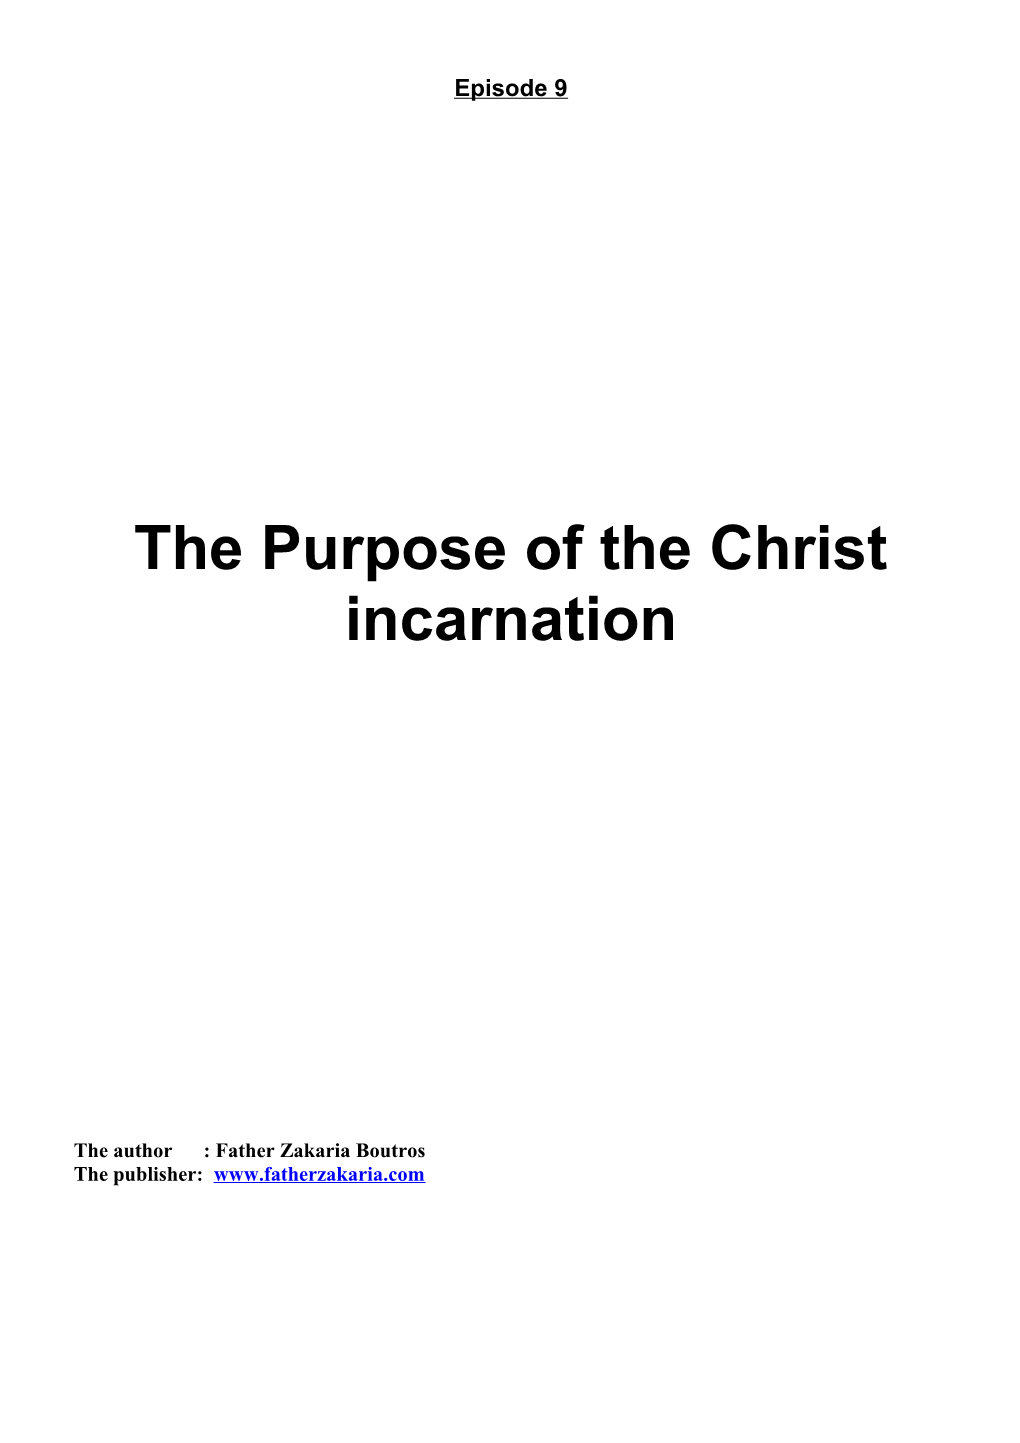 The Purpose of the Christ Incarnation